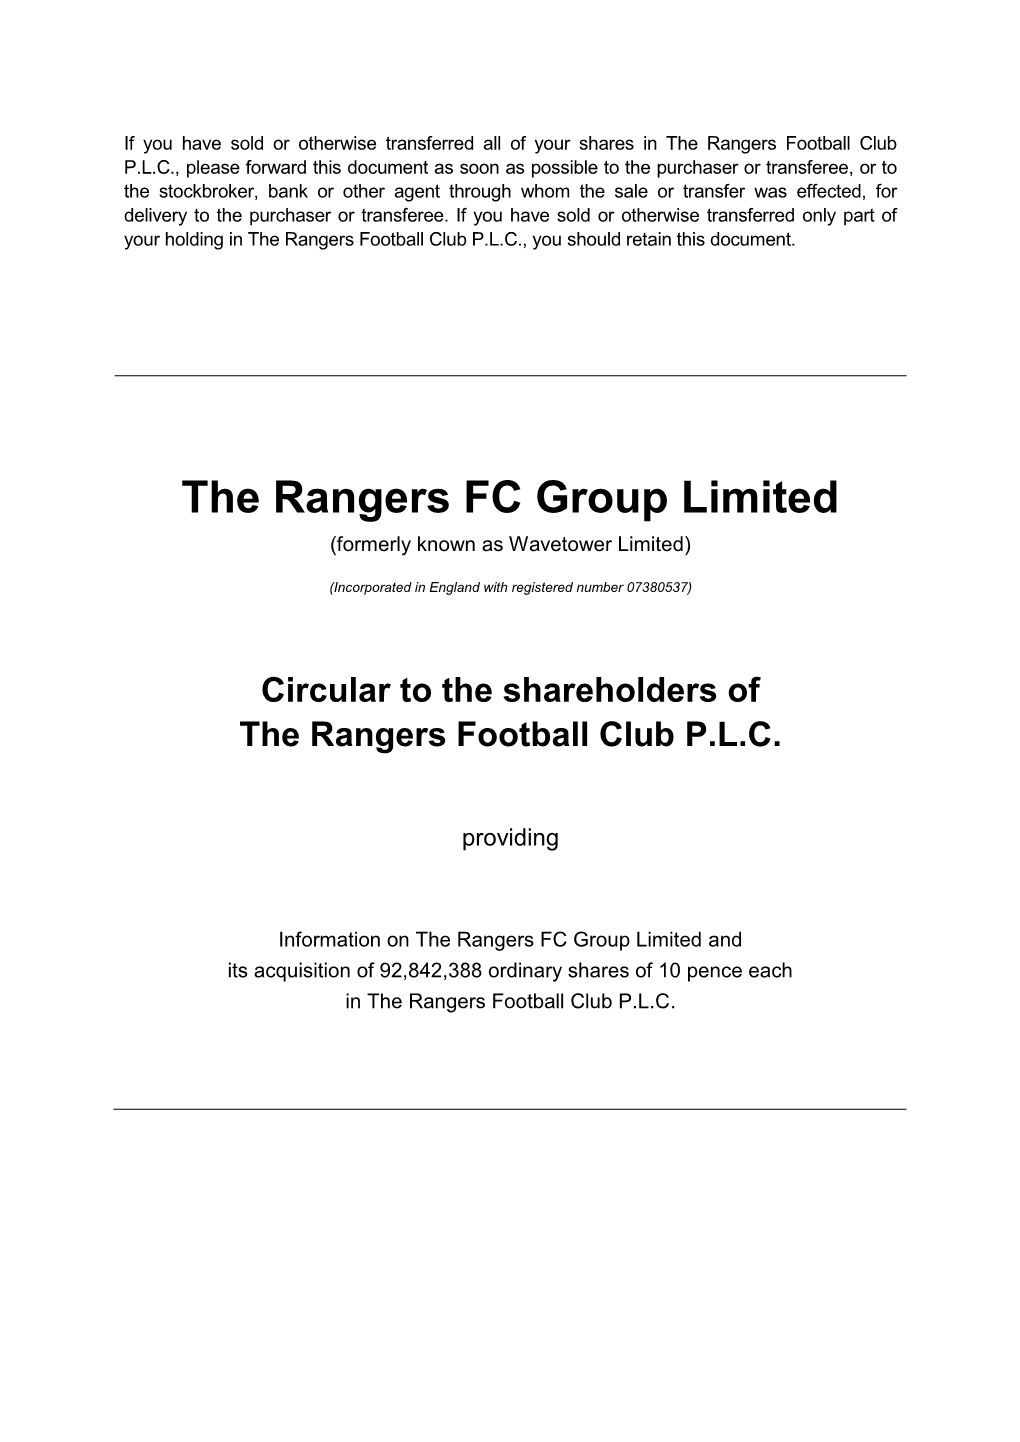 The Rangers FC Group Limited (Formerly Known As Wavetower Limited)